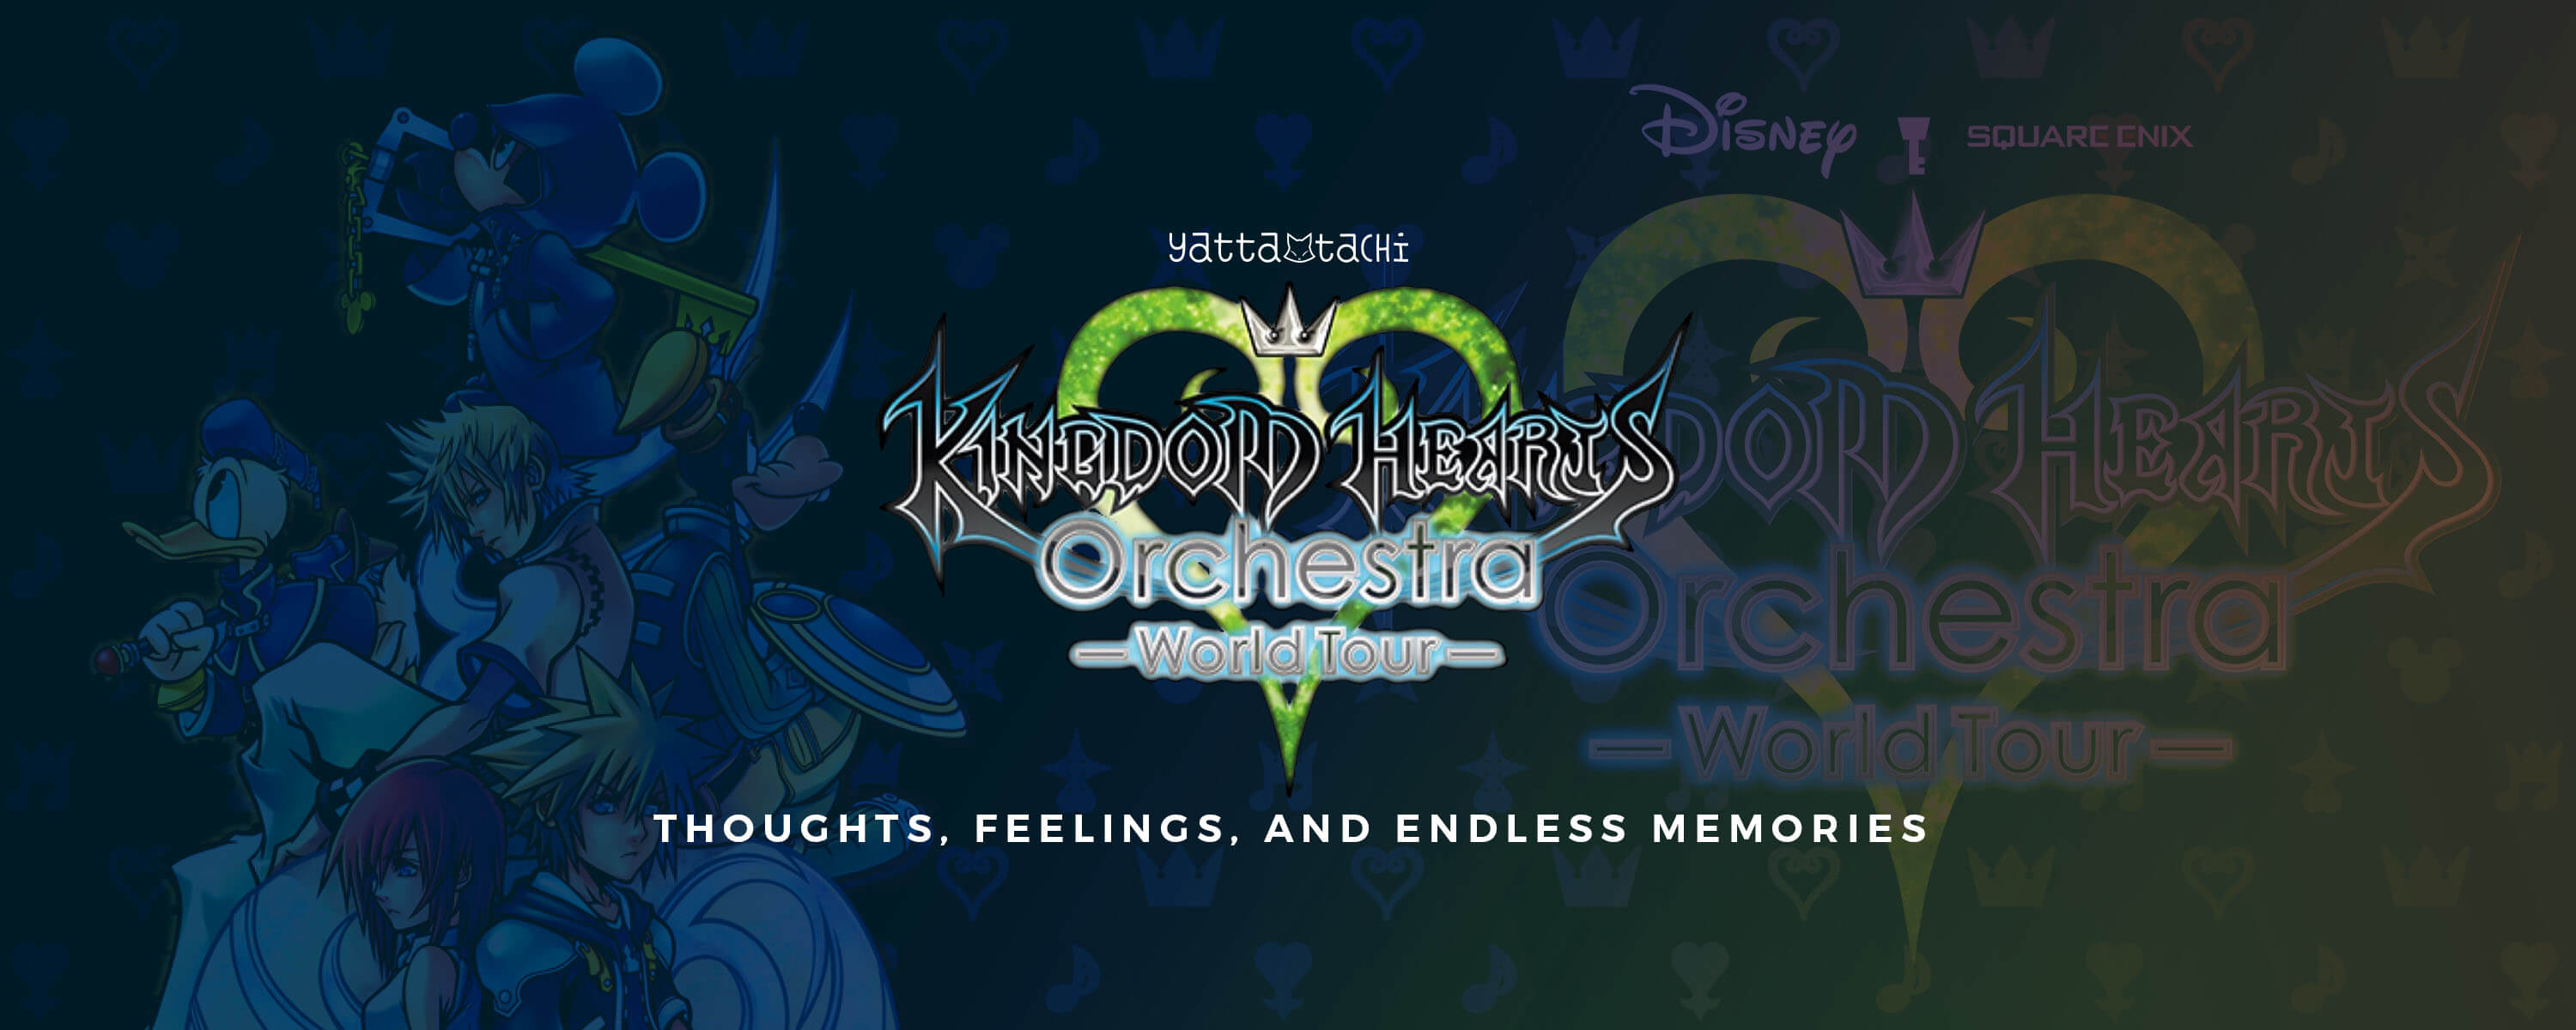 Kingdom Hearts Orchestra World Tour Features Exclusive Story Content